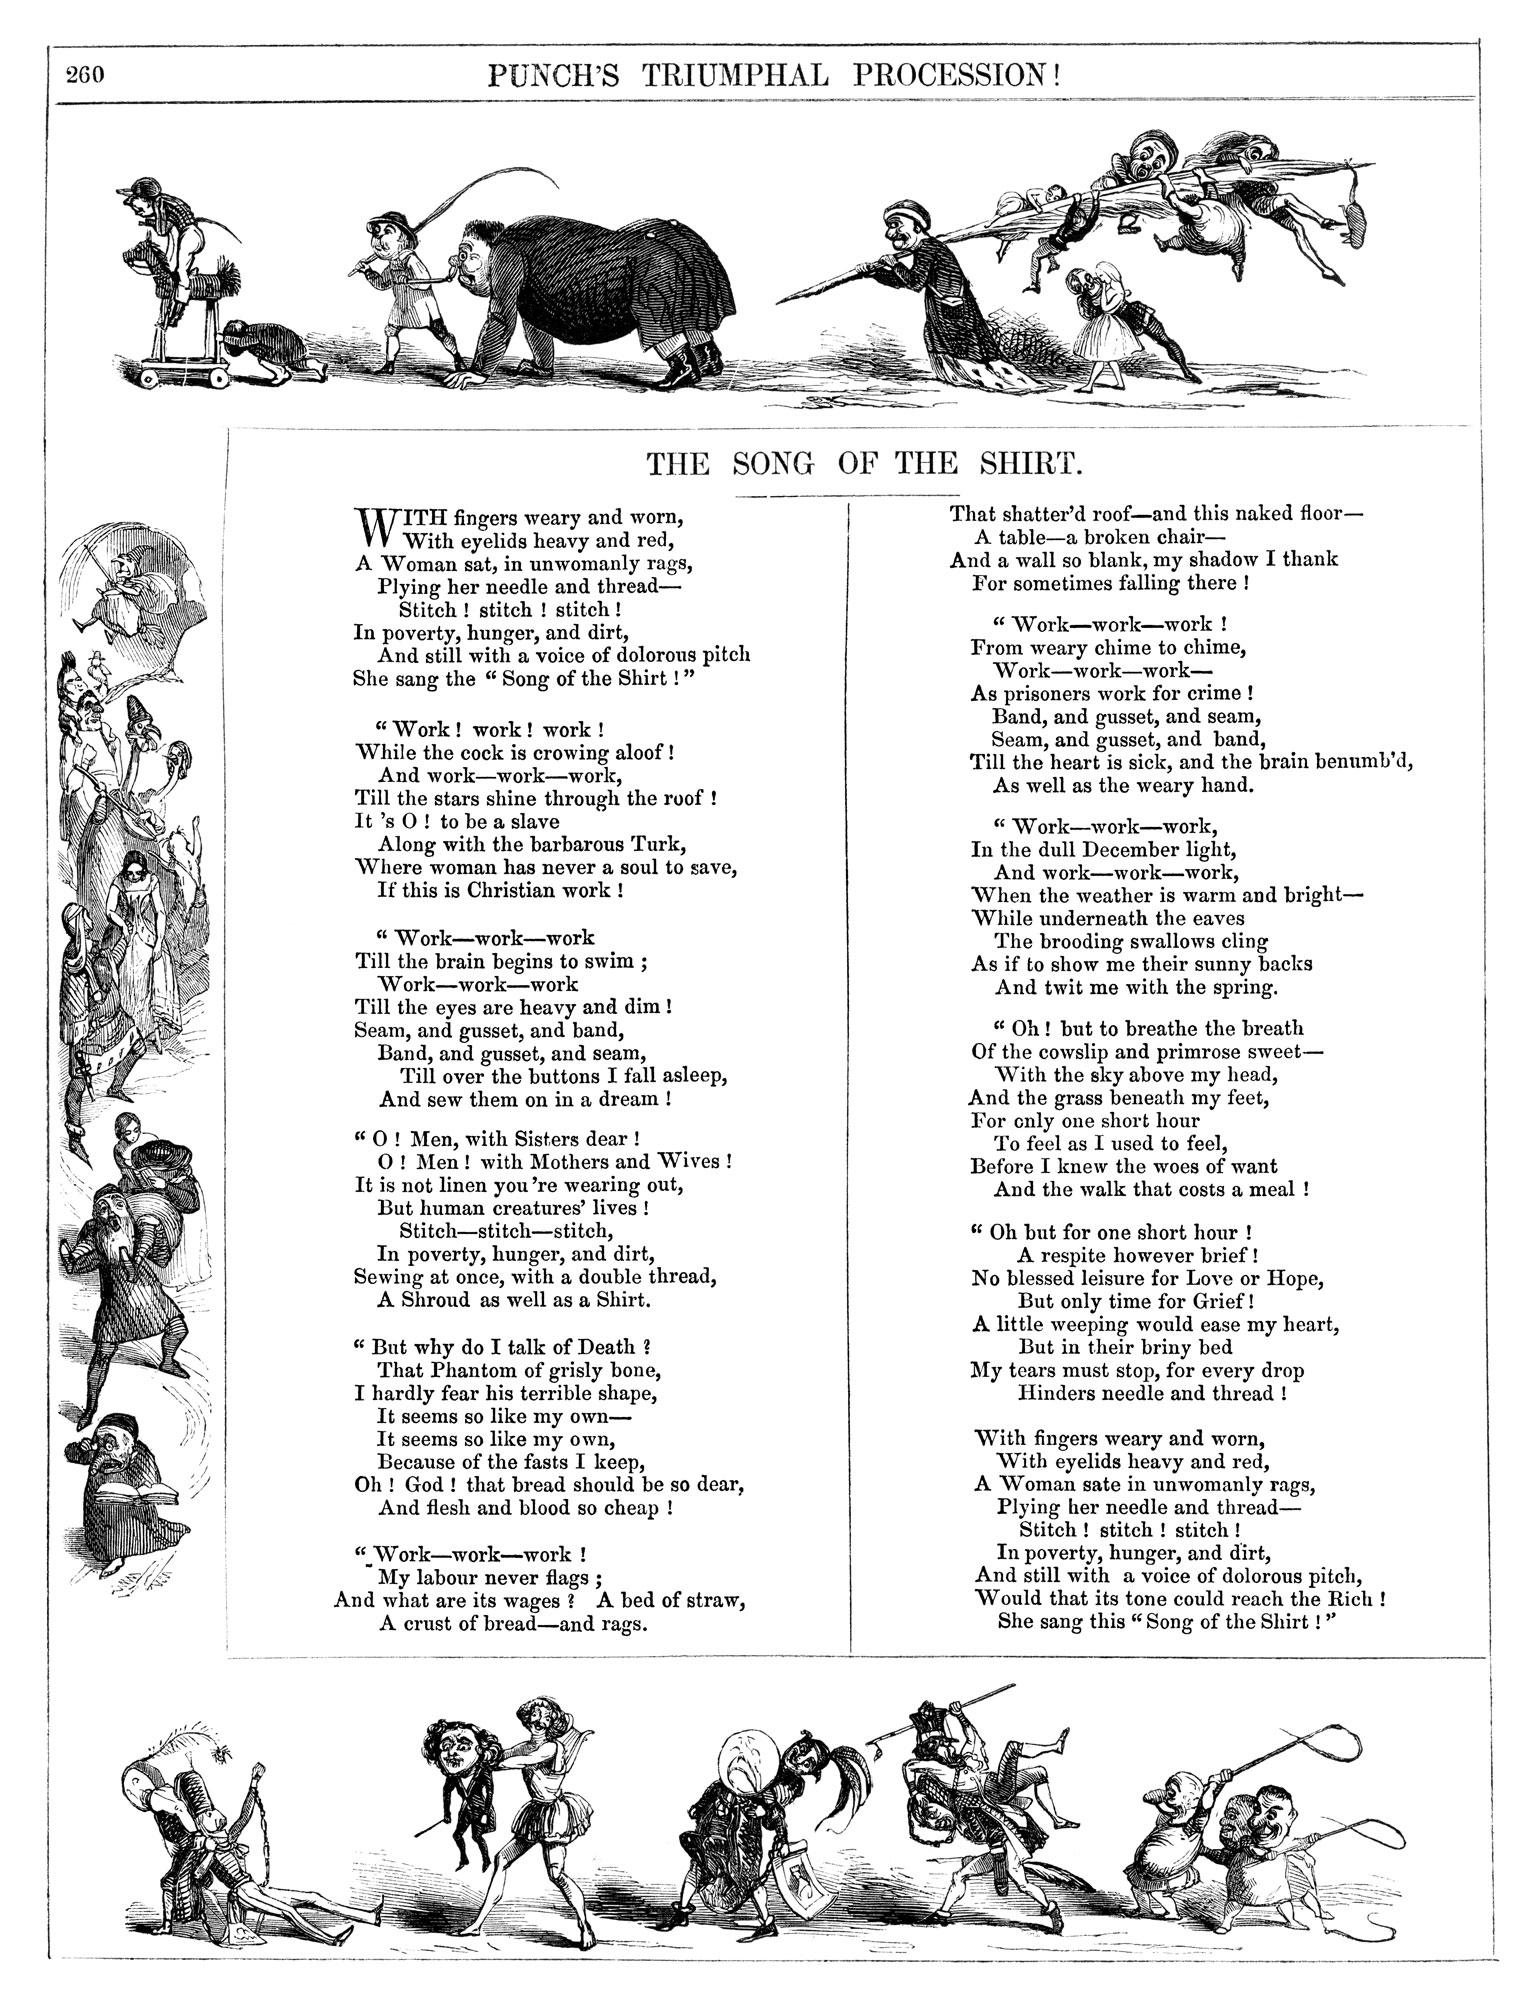 The Song of the Shirt, Thomas Hood, Punch Magazine